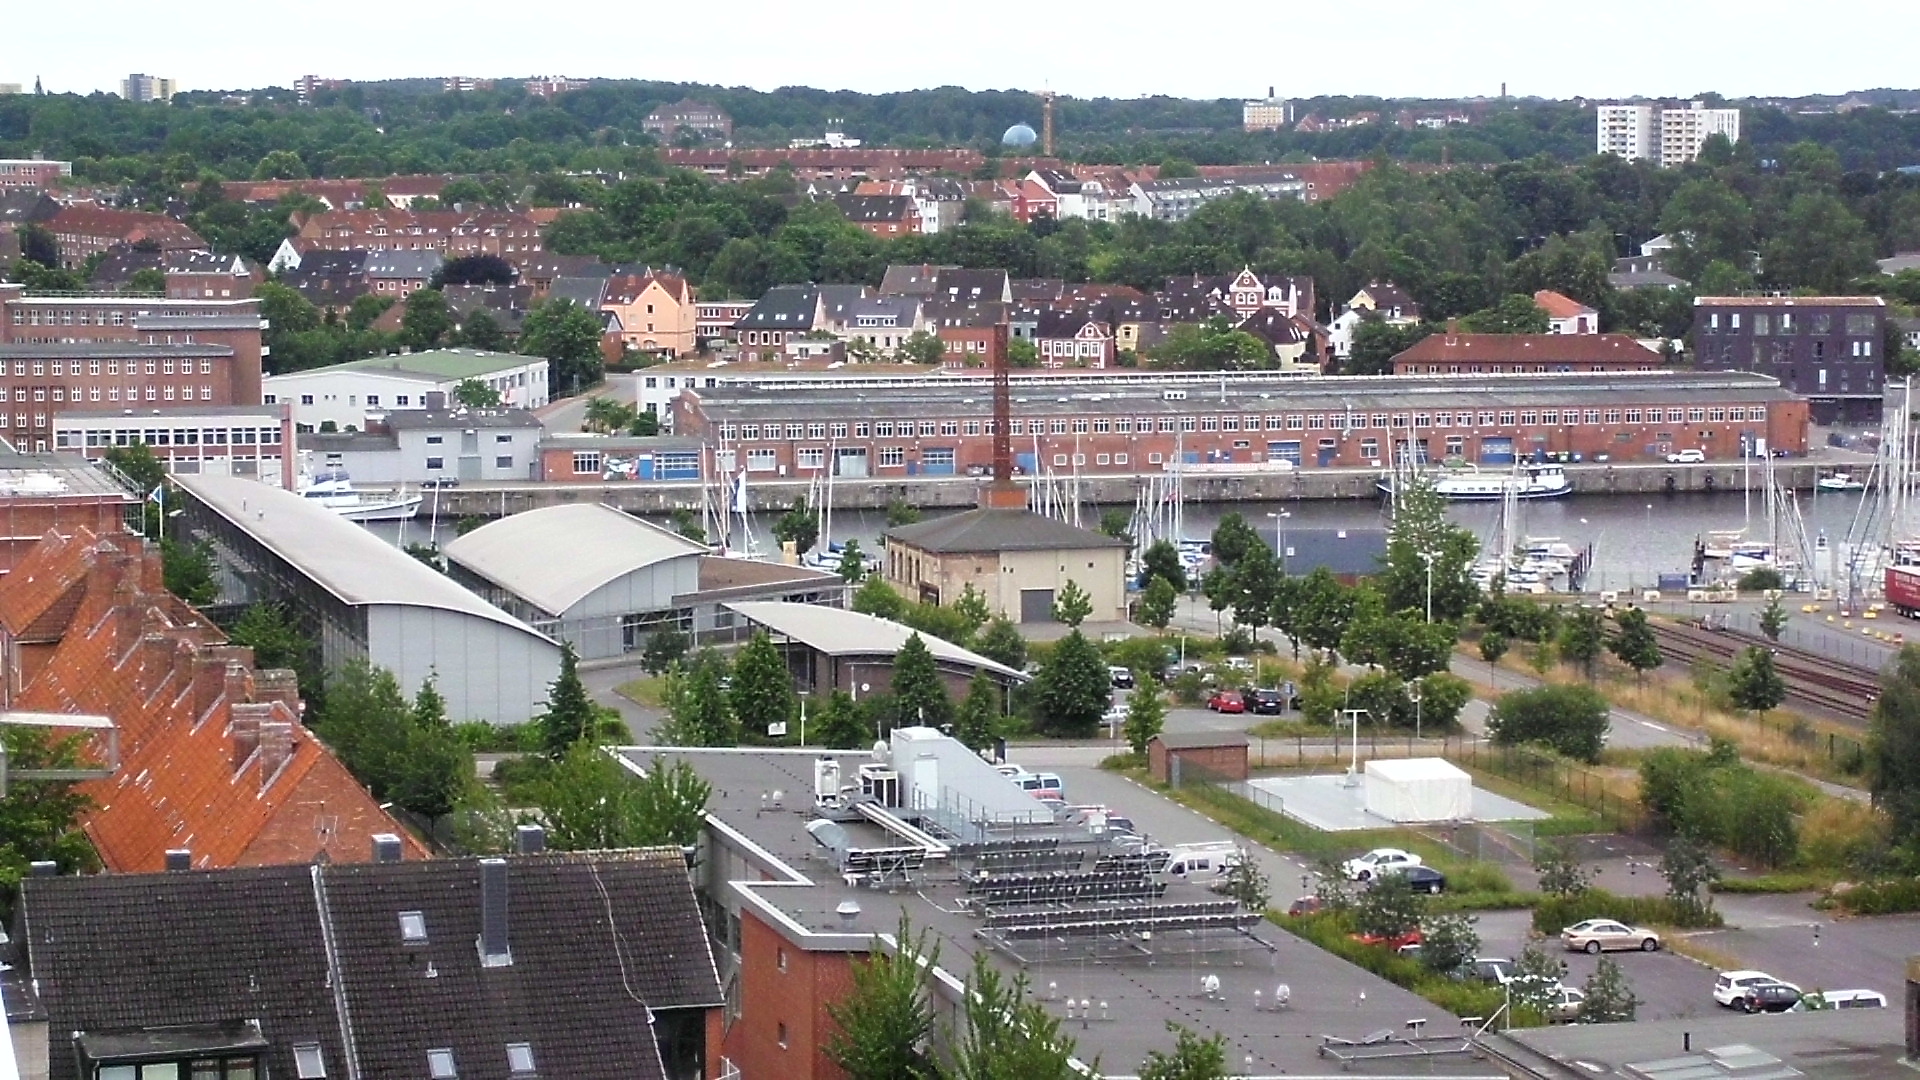 an urban area with buildings and lots of trees